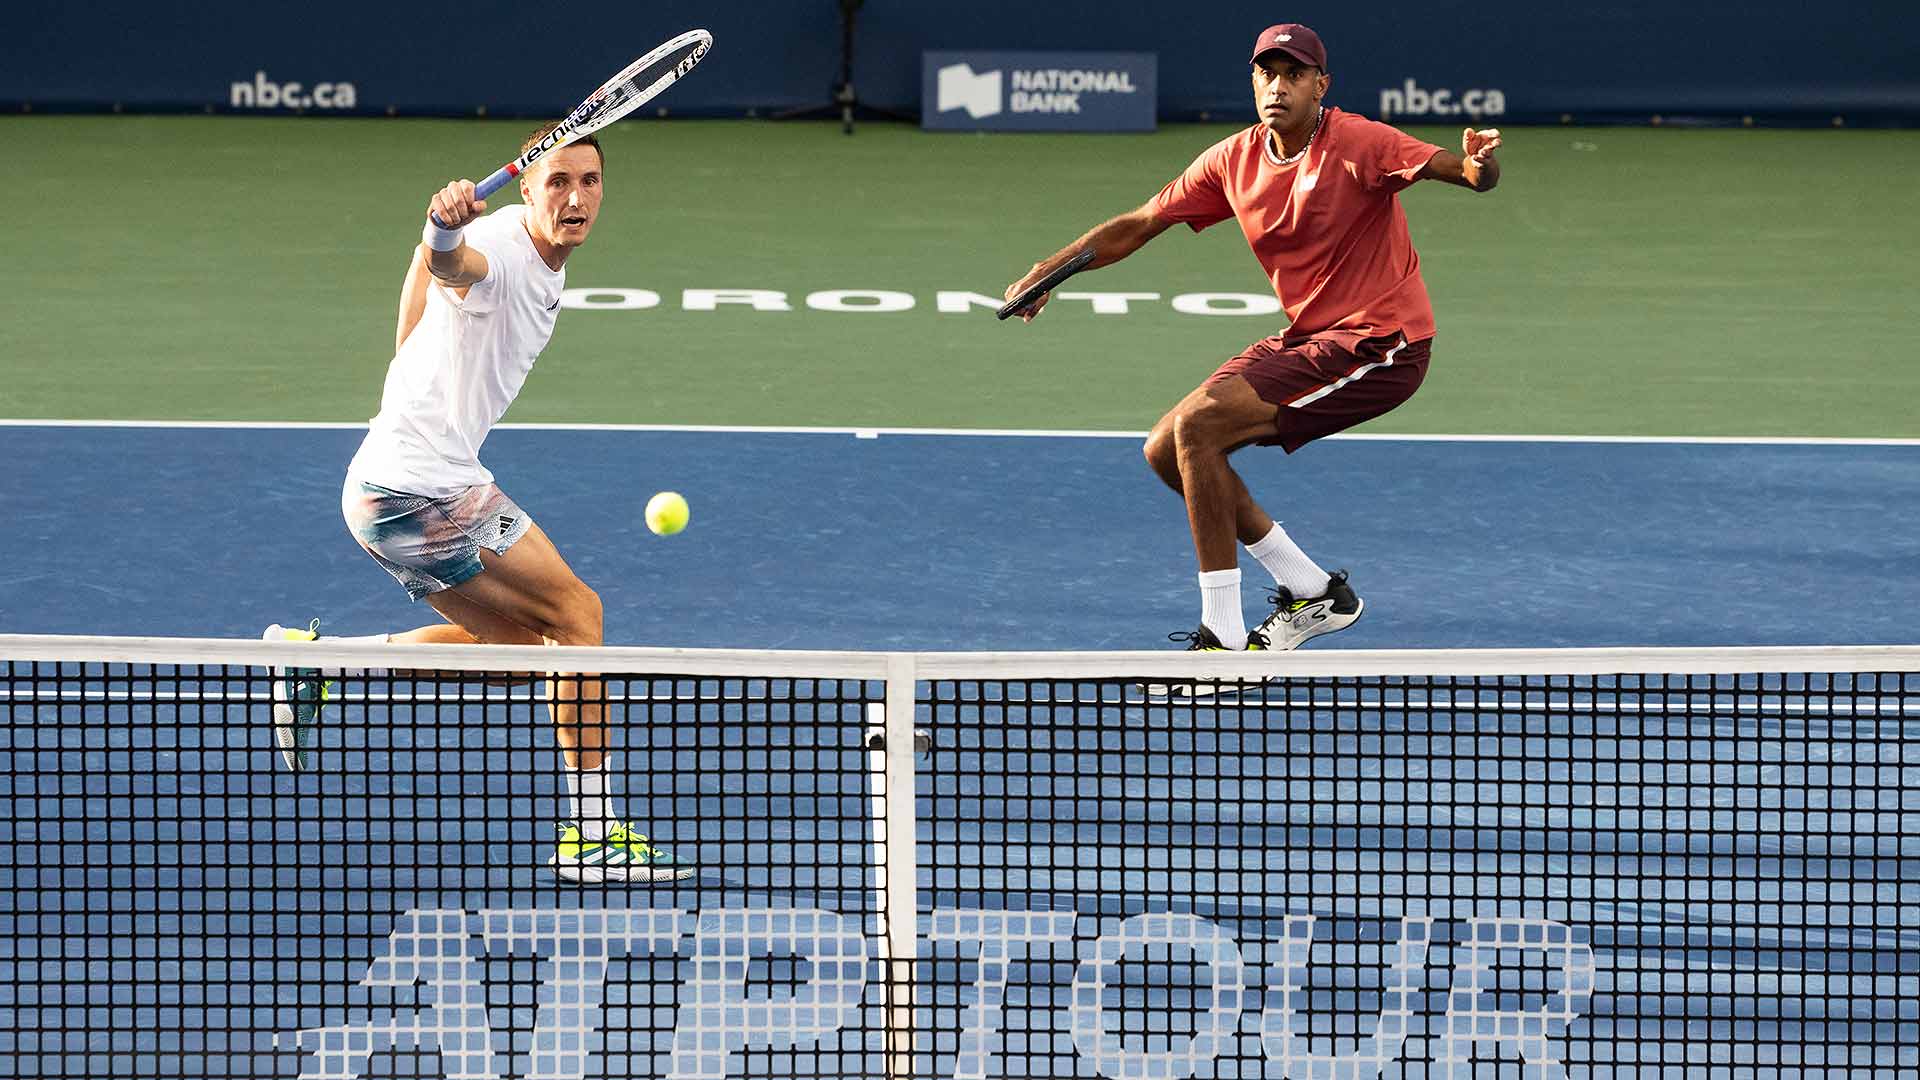 Arevalo/Rojer Finish Strong To Book Toronto Final Berth | ATP Tour | Tennis